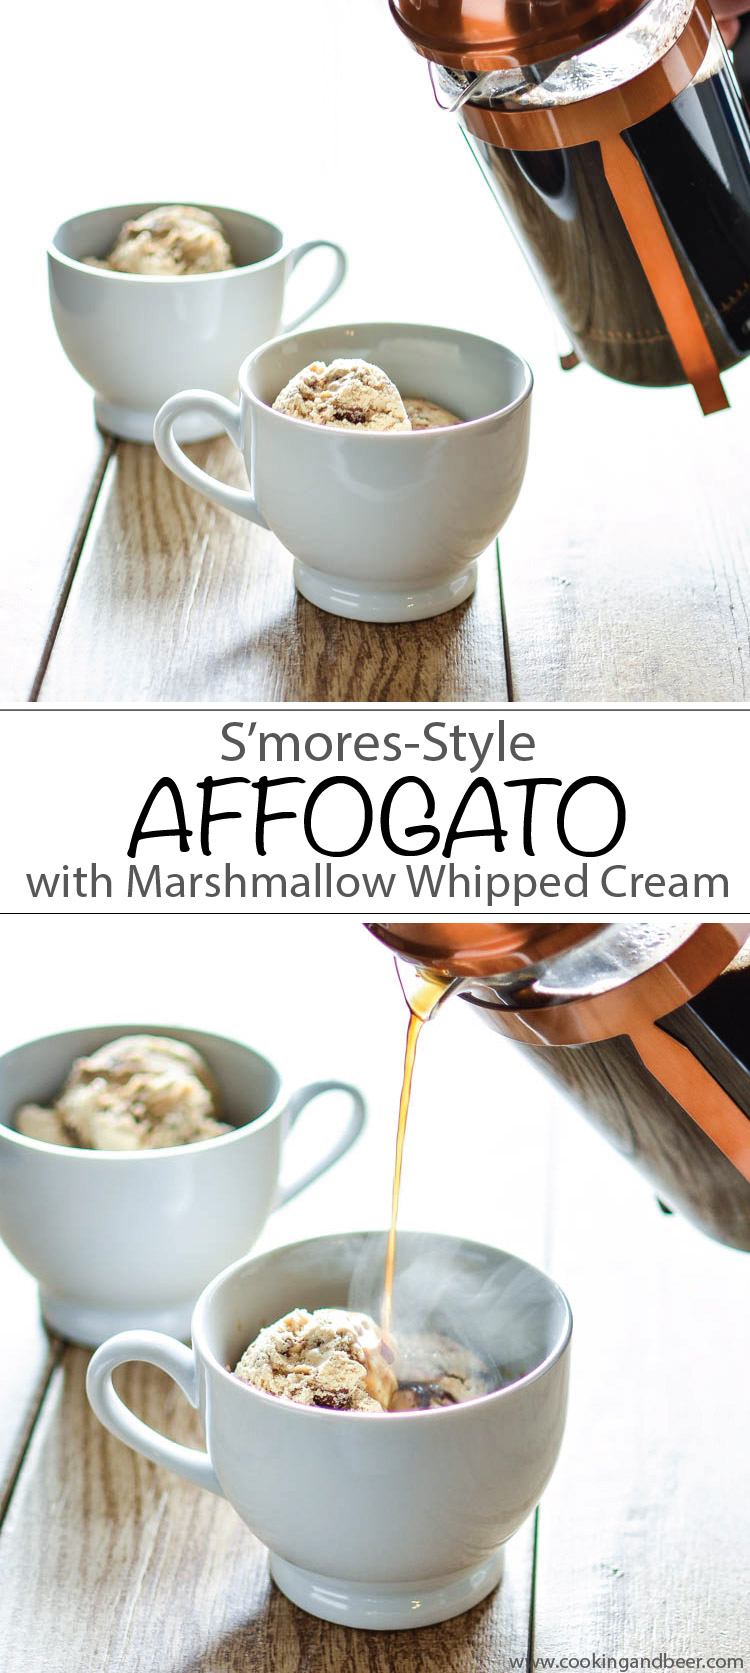 S'mores Affogato with Marshmallow Whipped Cream | www.cookingandbeer.com